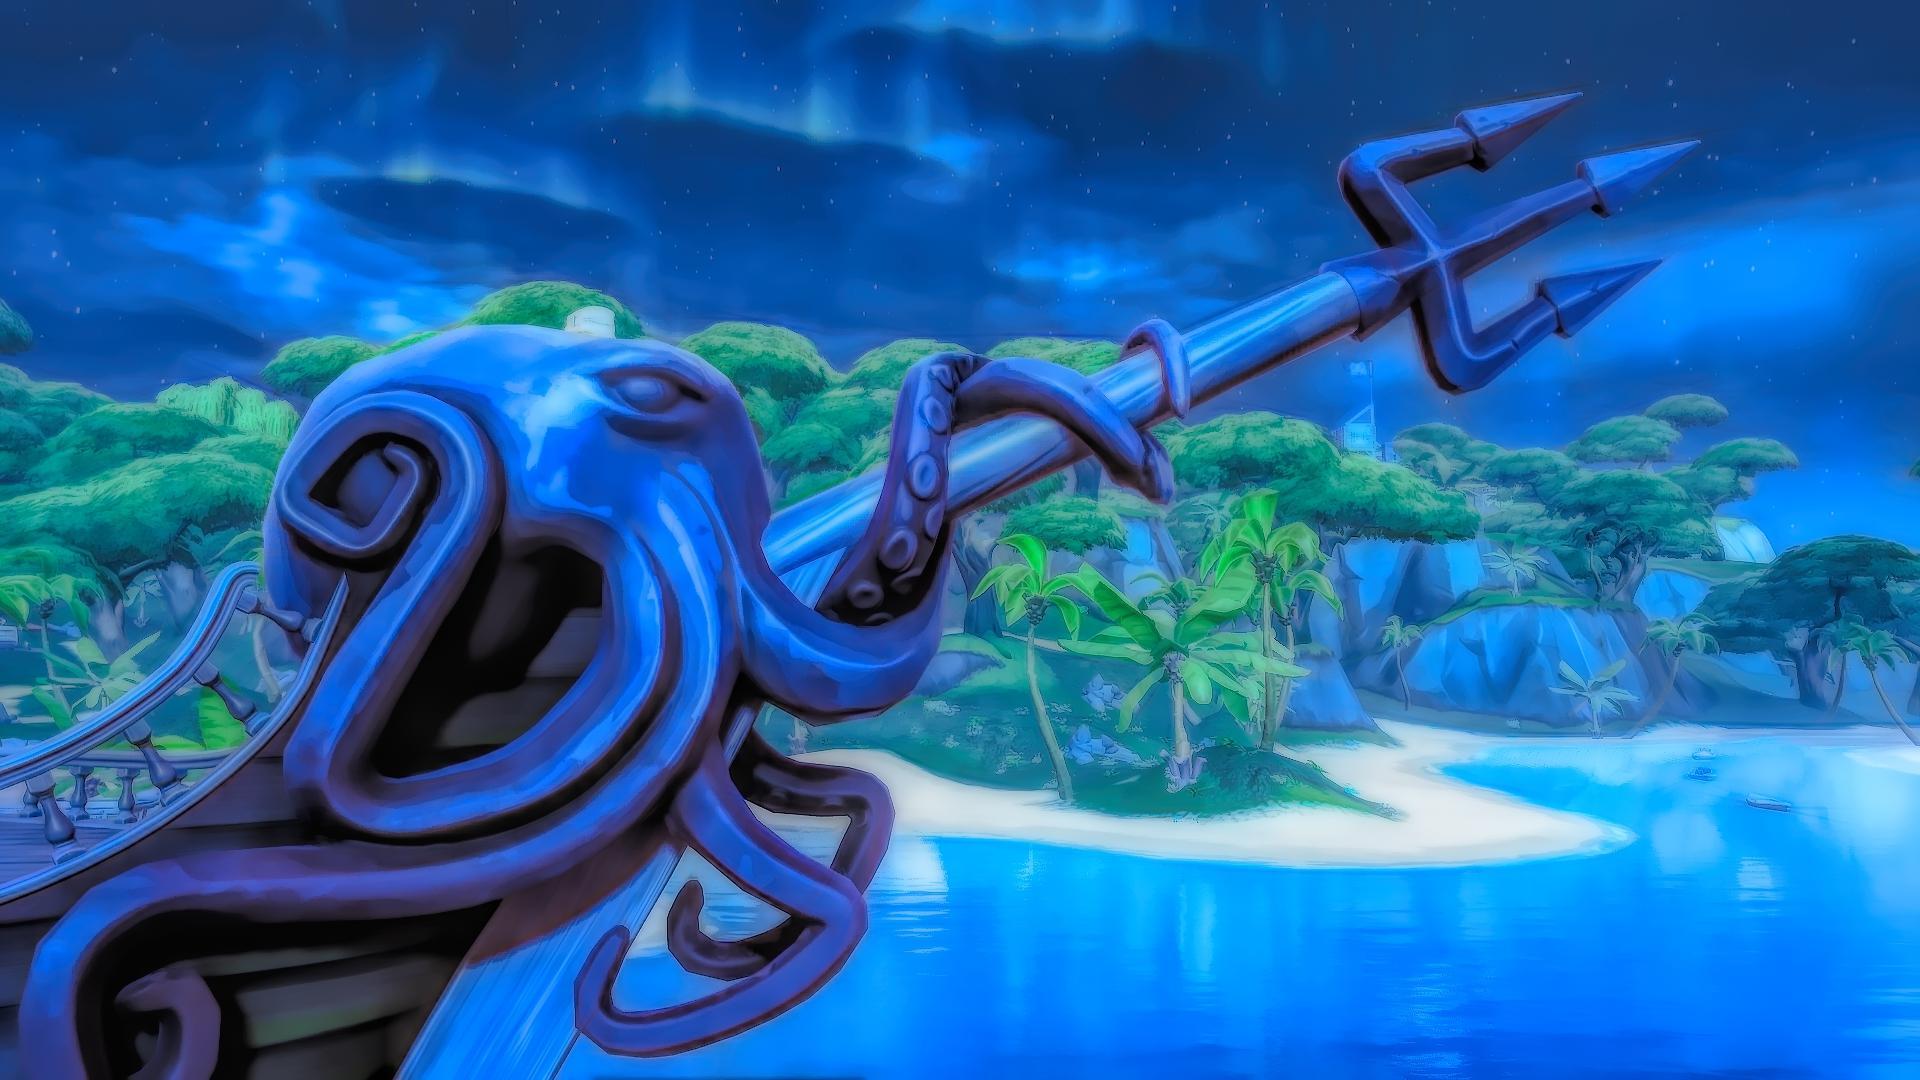 Octopus Pirate Ship - Fortnite Background Hd Pirate , HD Wallpaper & Backgrounds